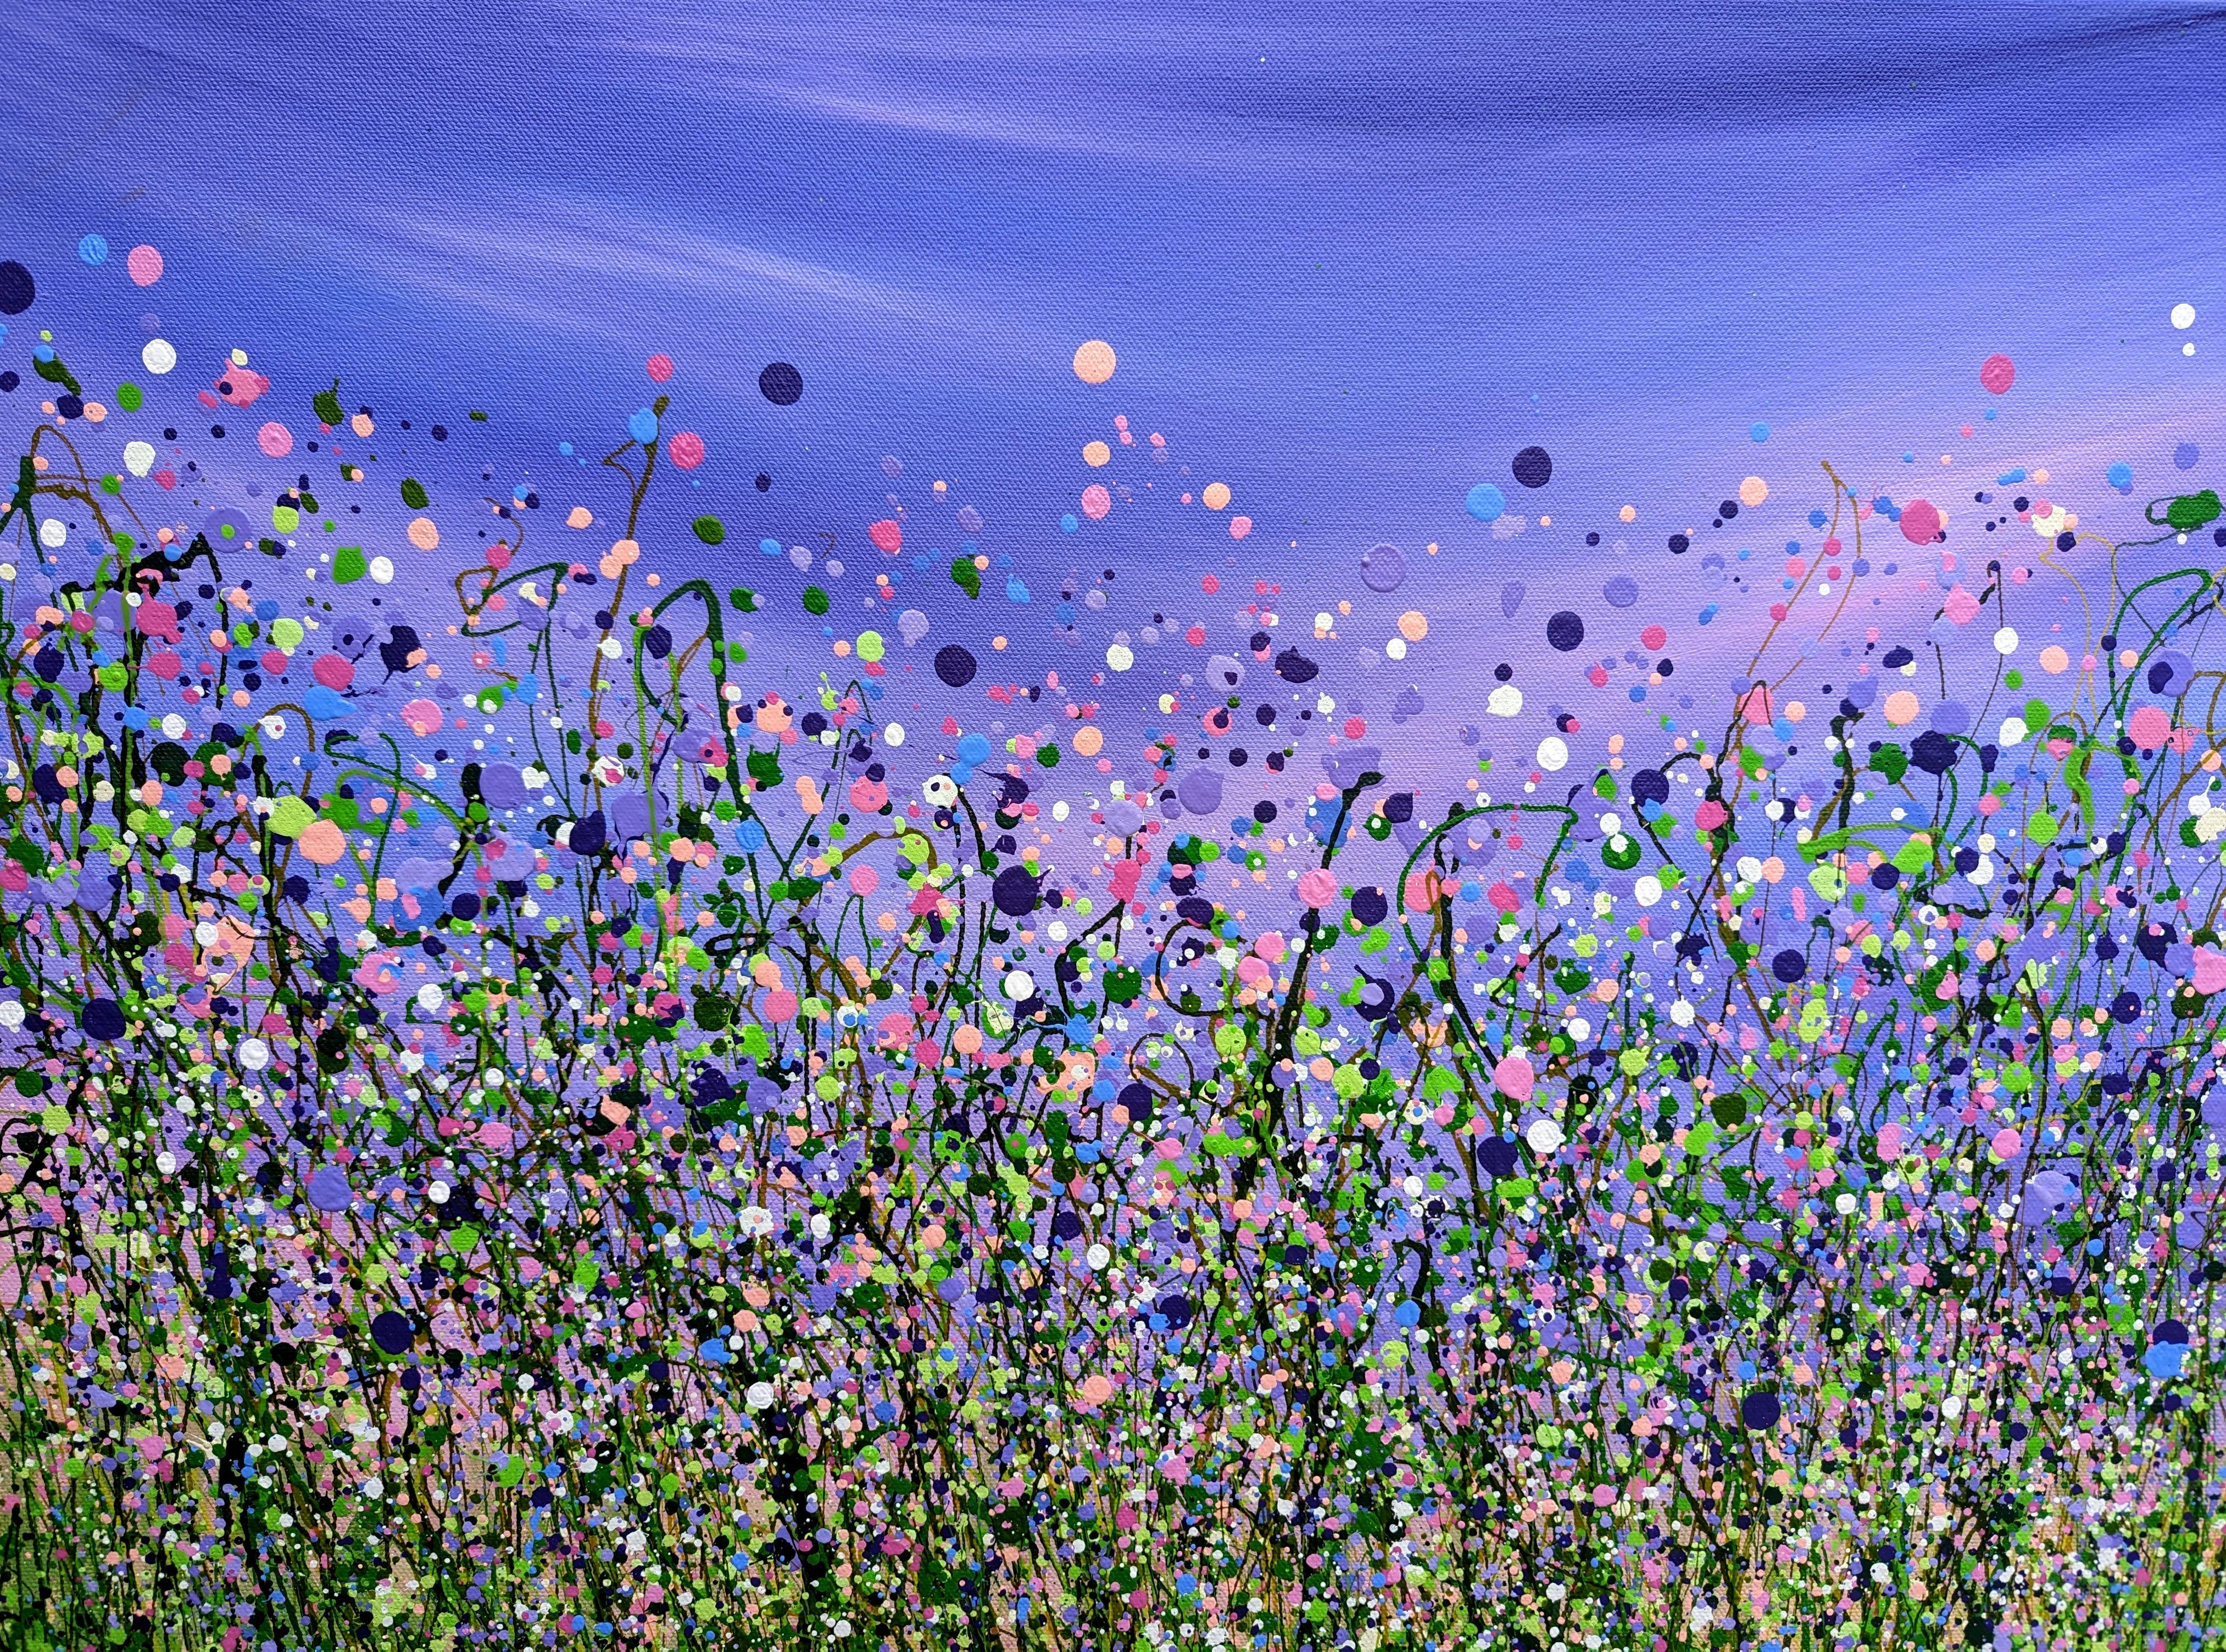 Wrapped Up In A Daydream #17 60 x 60 cm    Bring a little magic to your walls with this fantasy inspired meadow.    Signed on the Front  Ready To Hang  Edges painted white    A statement piece to brighten any home or office.    Using my signature